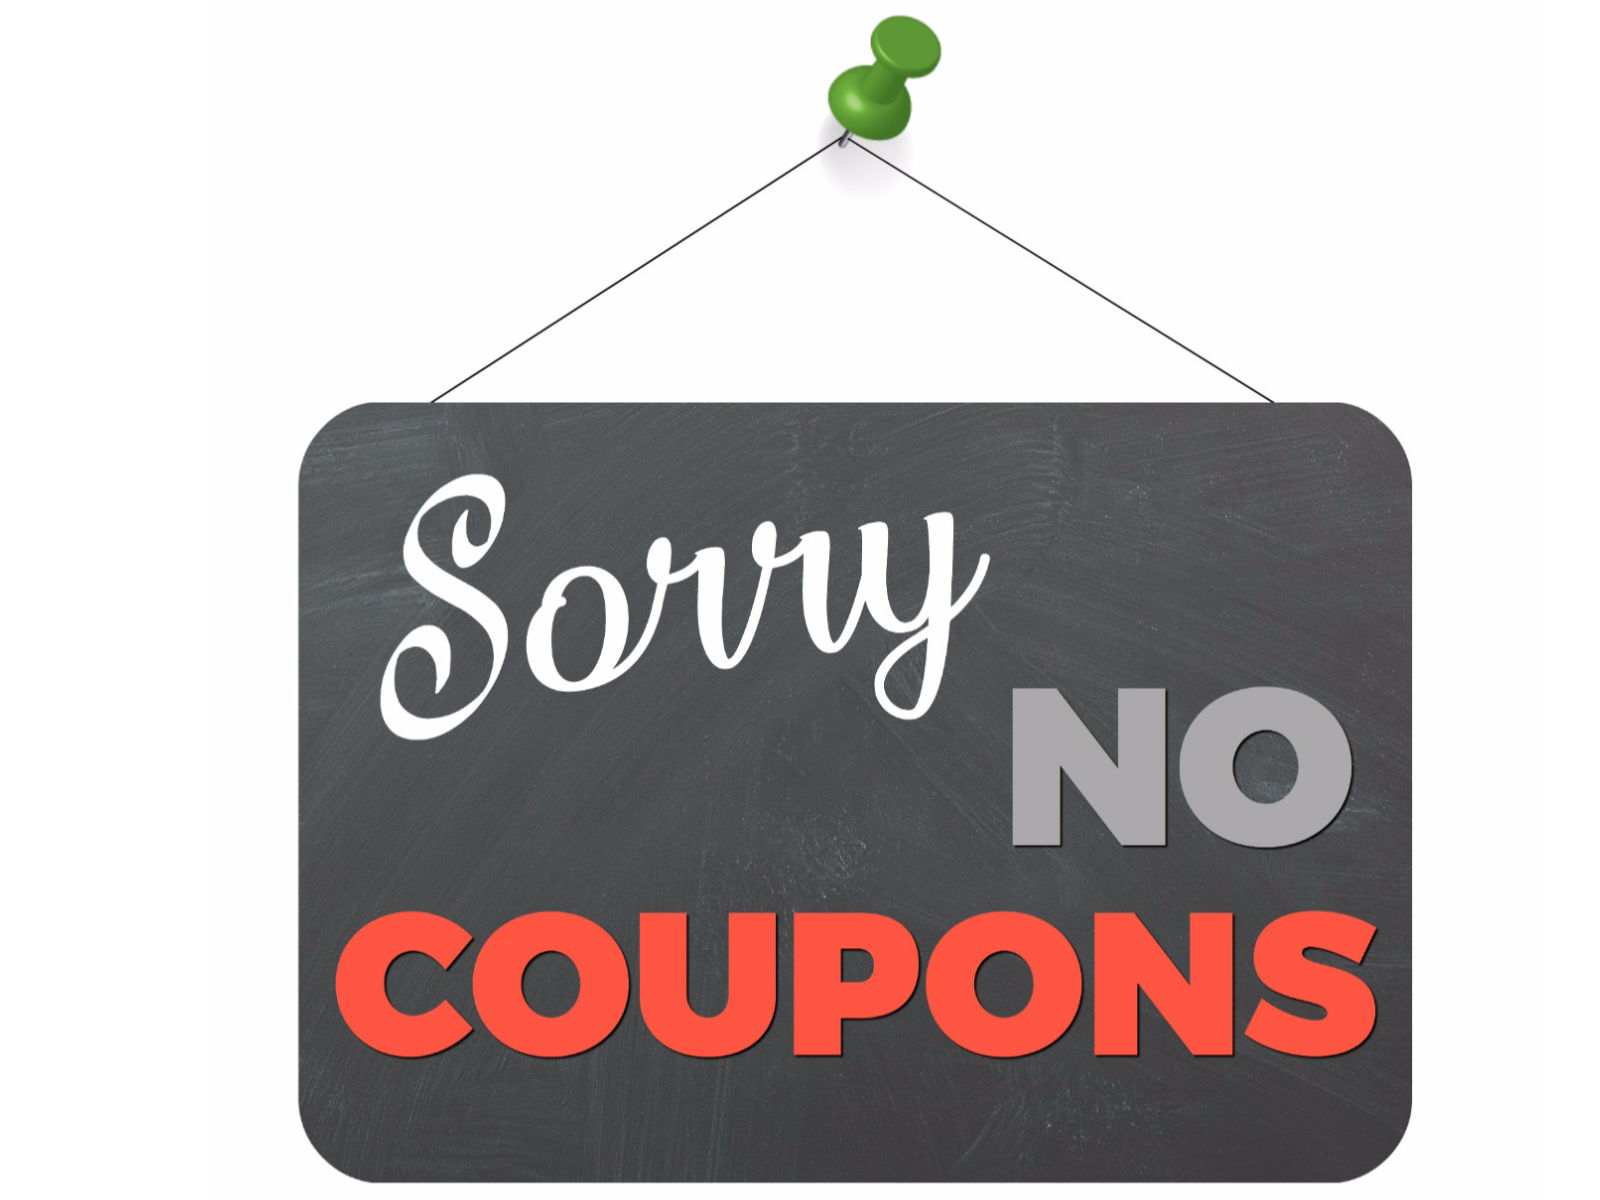 Sunday Coupon Preview For 9/1 - NO INSERTS! on I Heart Publix